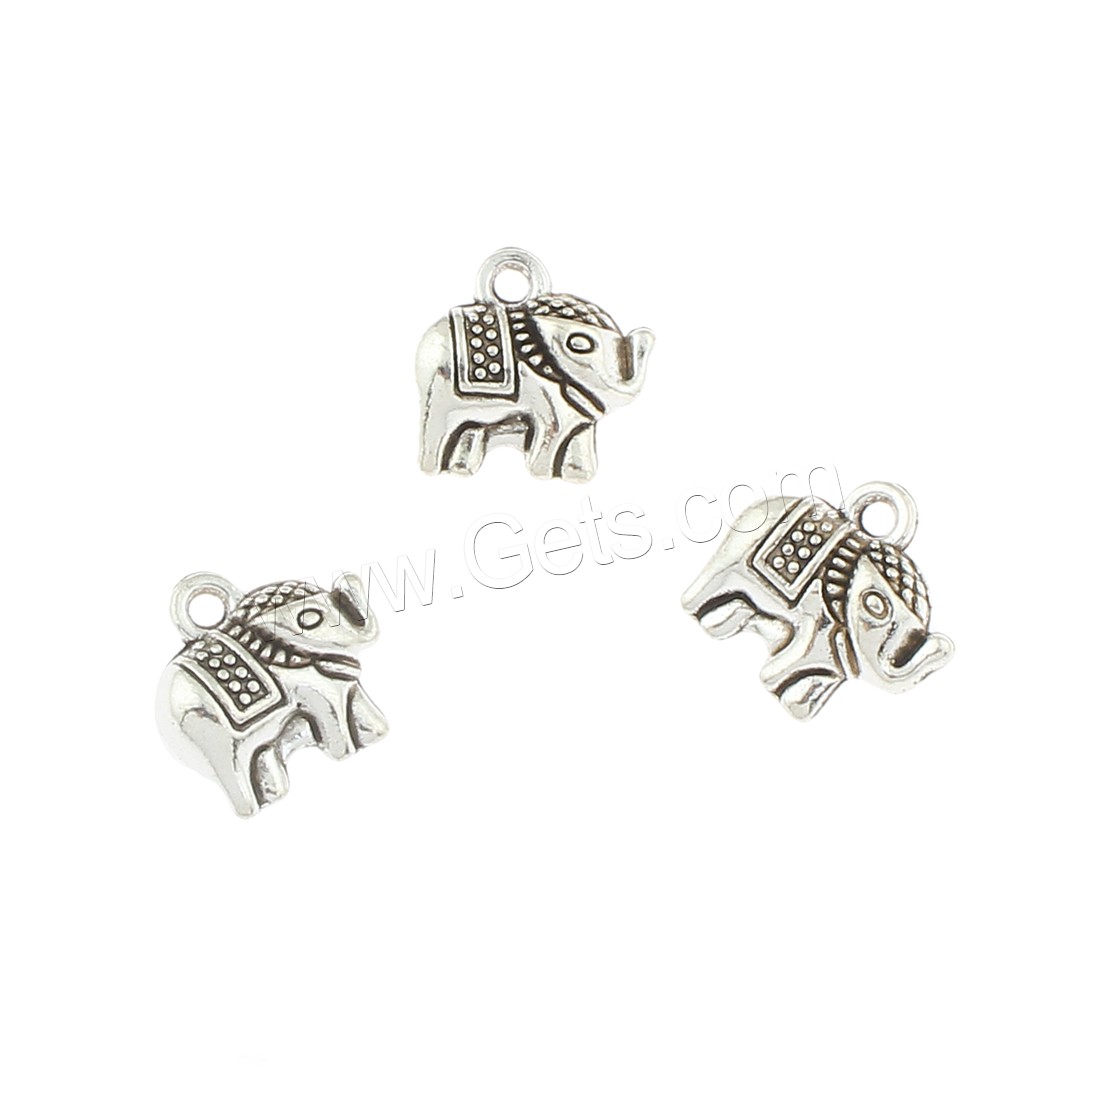 Zinc Alloy Animal Pendants, Elephant, antique silver color plated, 11x11x5mm, Hole:Approx 1mm, Approx 350PCs/Bag, Sold By Bag